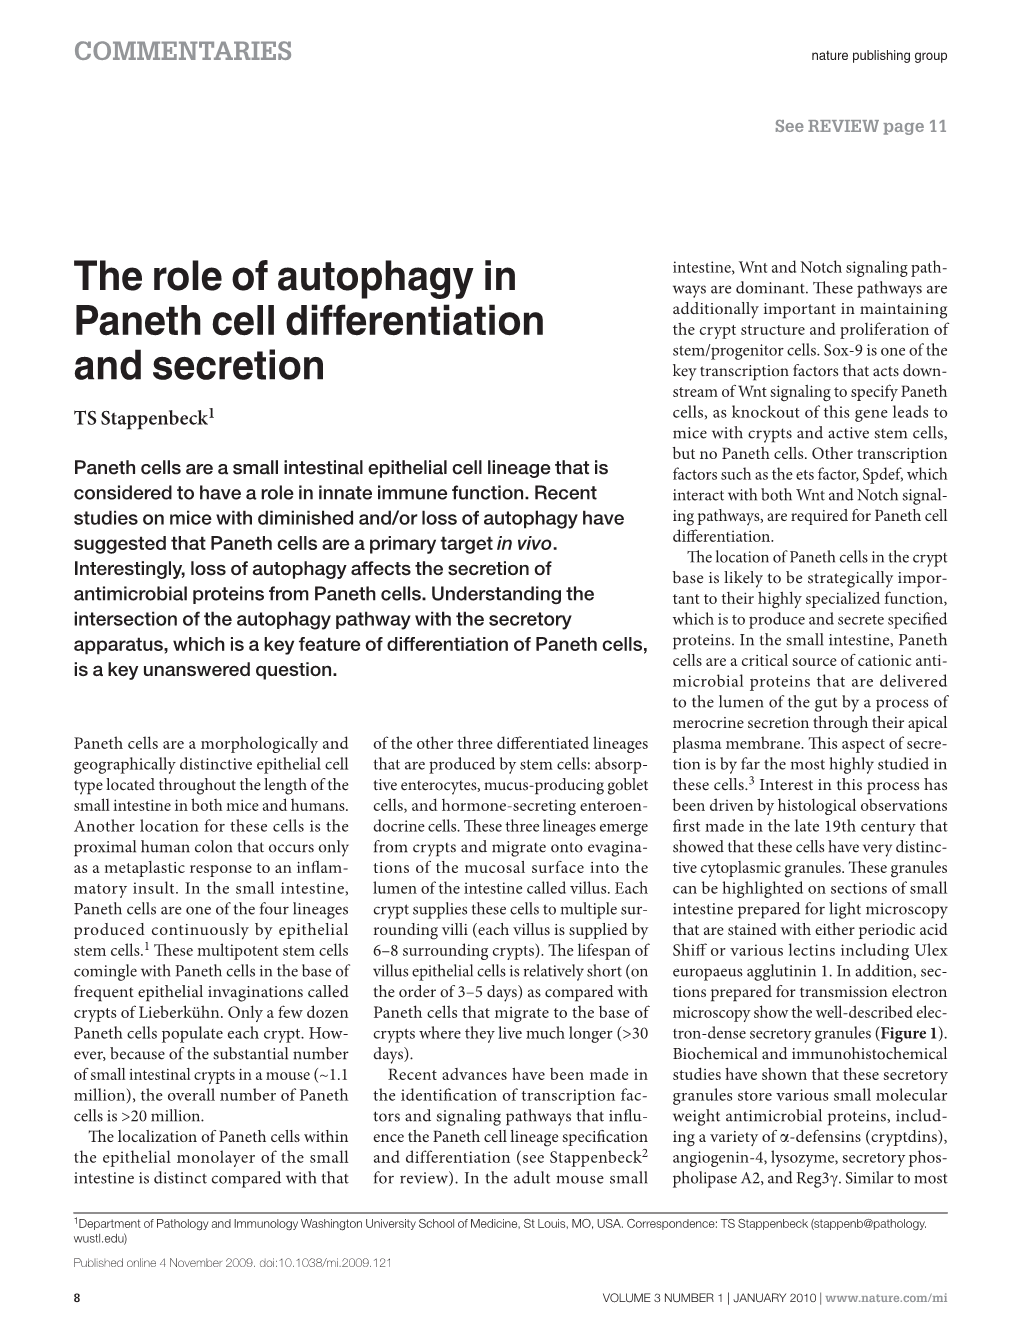 The Role of Autophagy in Paneth Cell Differentiation and Secretion